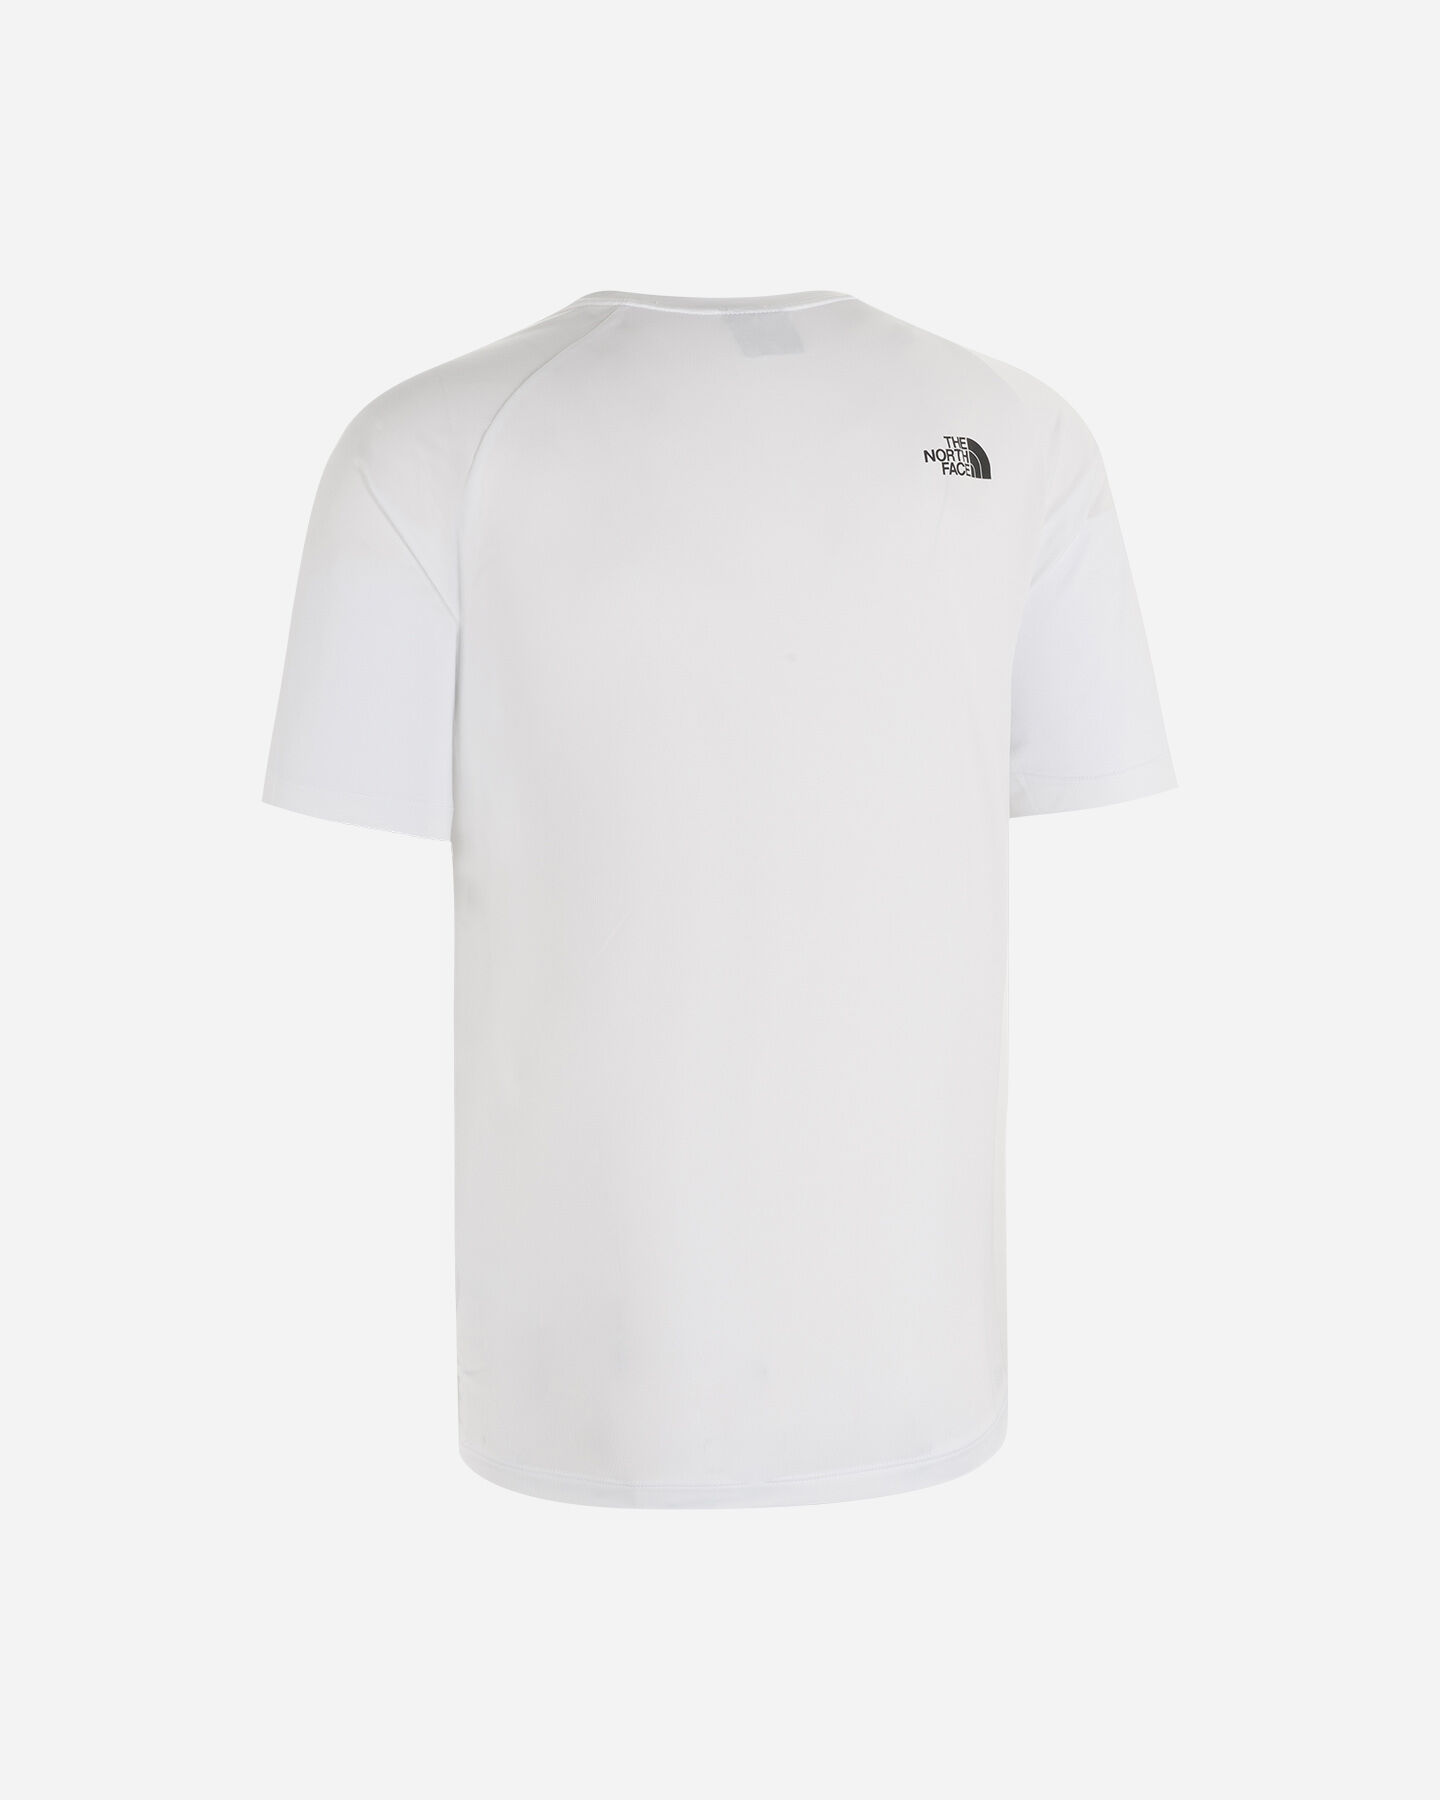  T-Shirt THE NORTH FACE ODLES TECH M S5430742 scatto 1